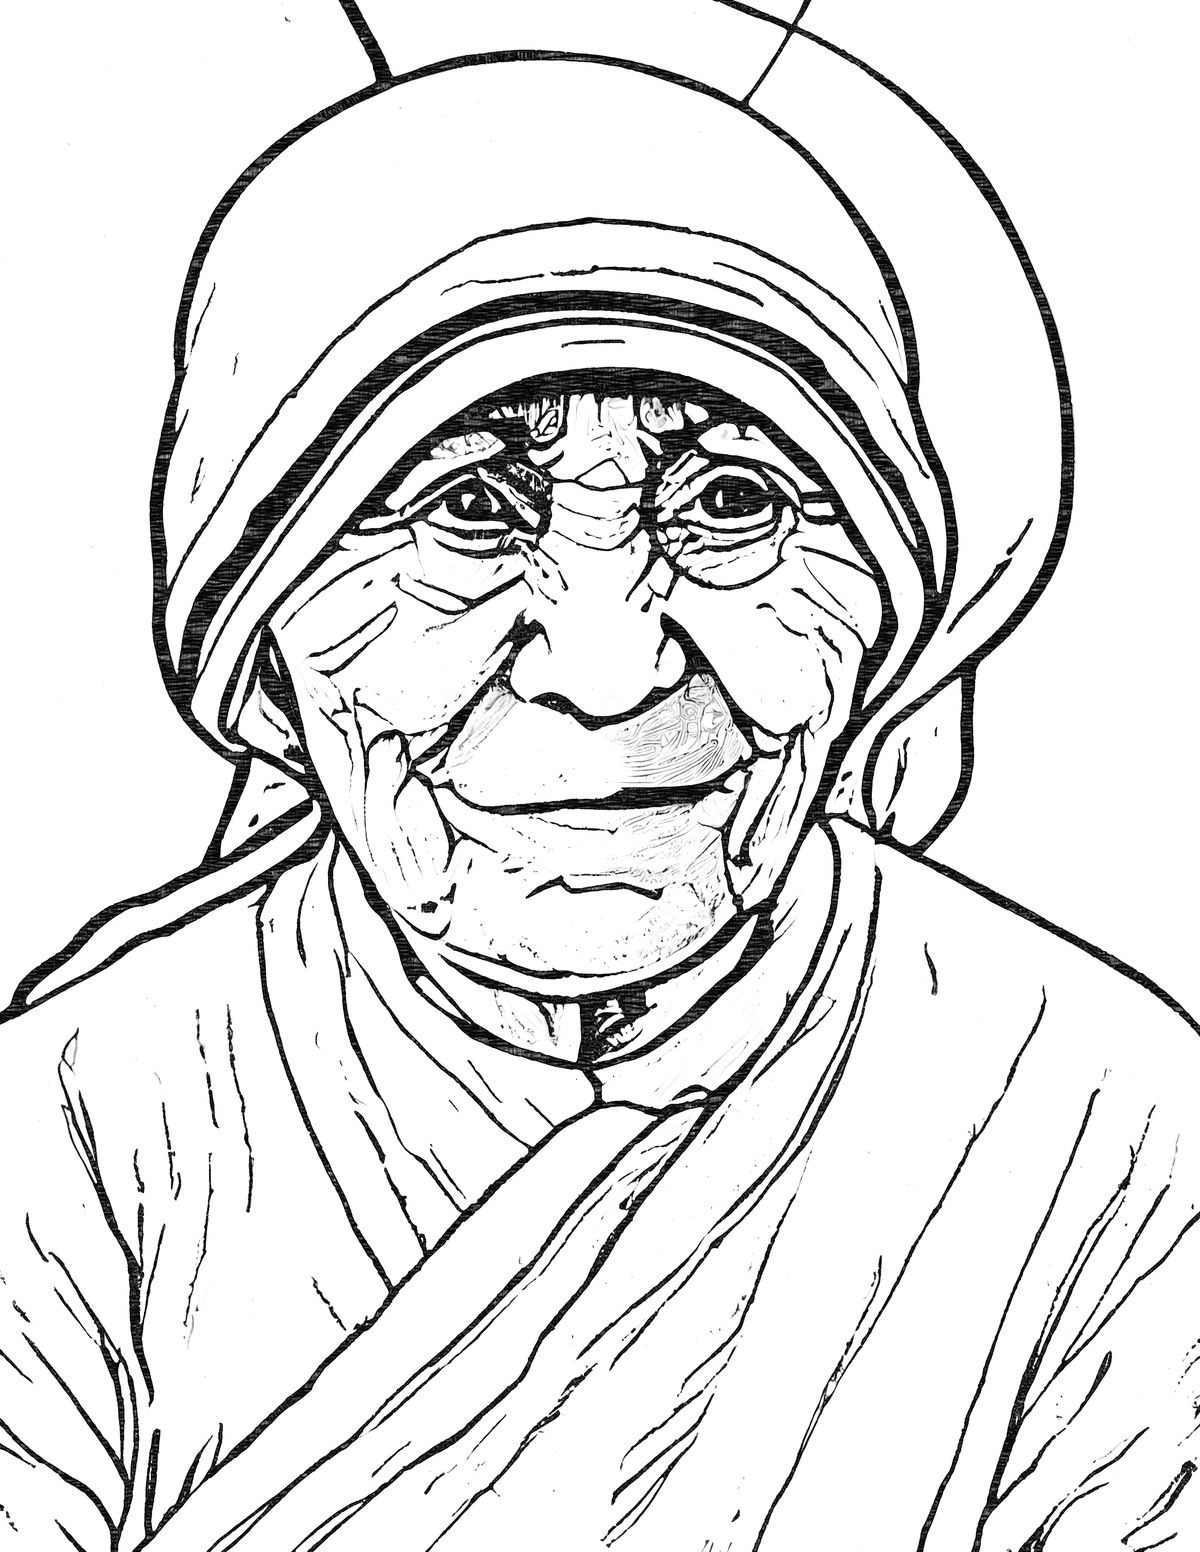 Mother Teresa - Catholic Coloring Page